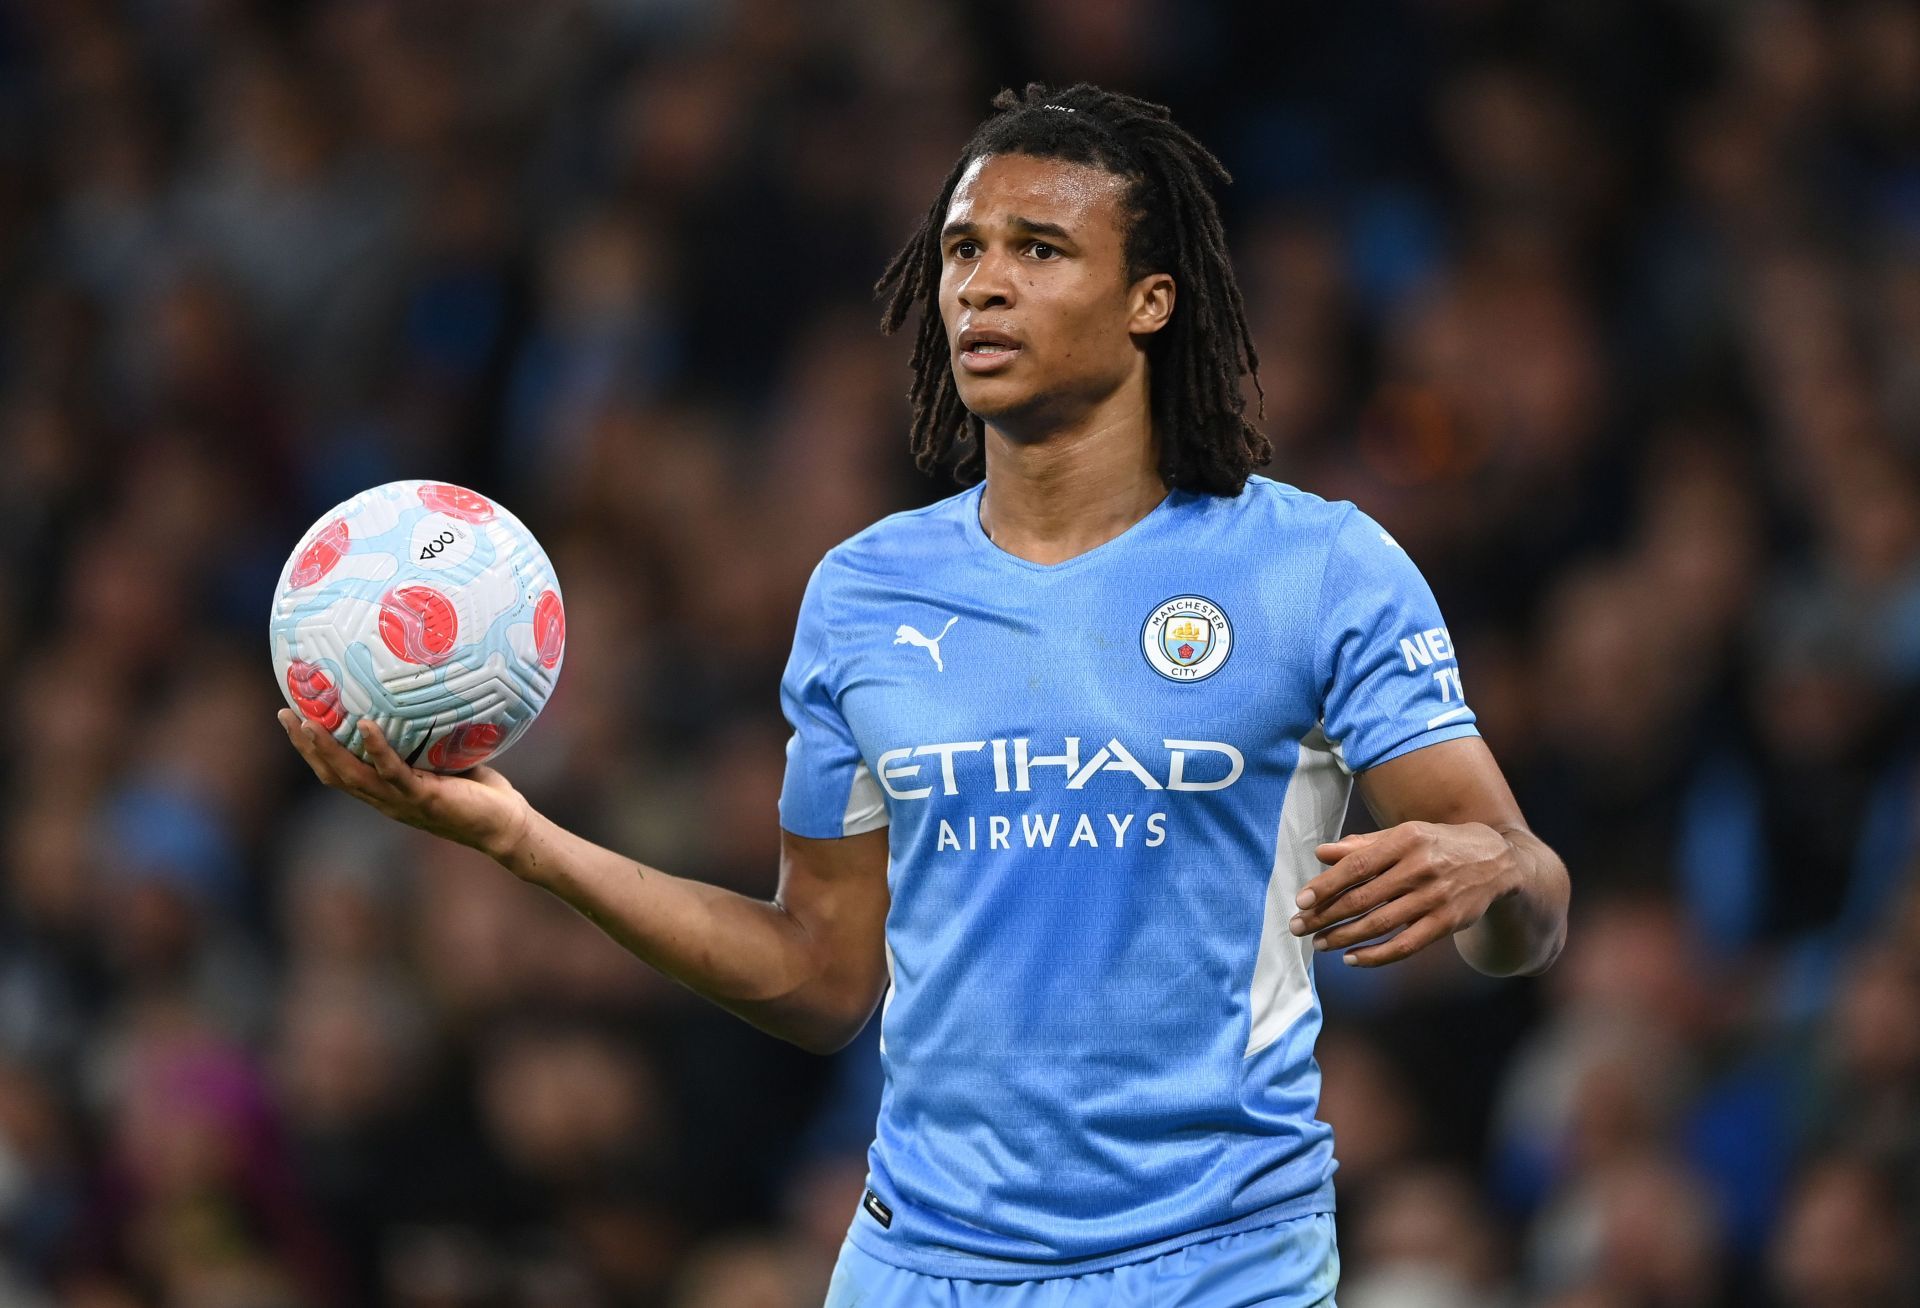 Ake is a highly-rated Dutch centre-back